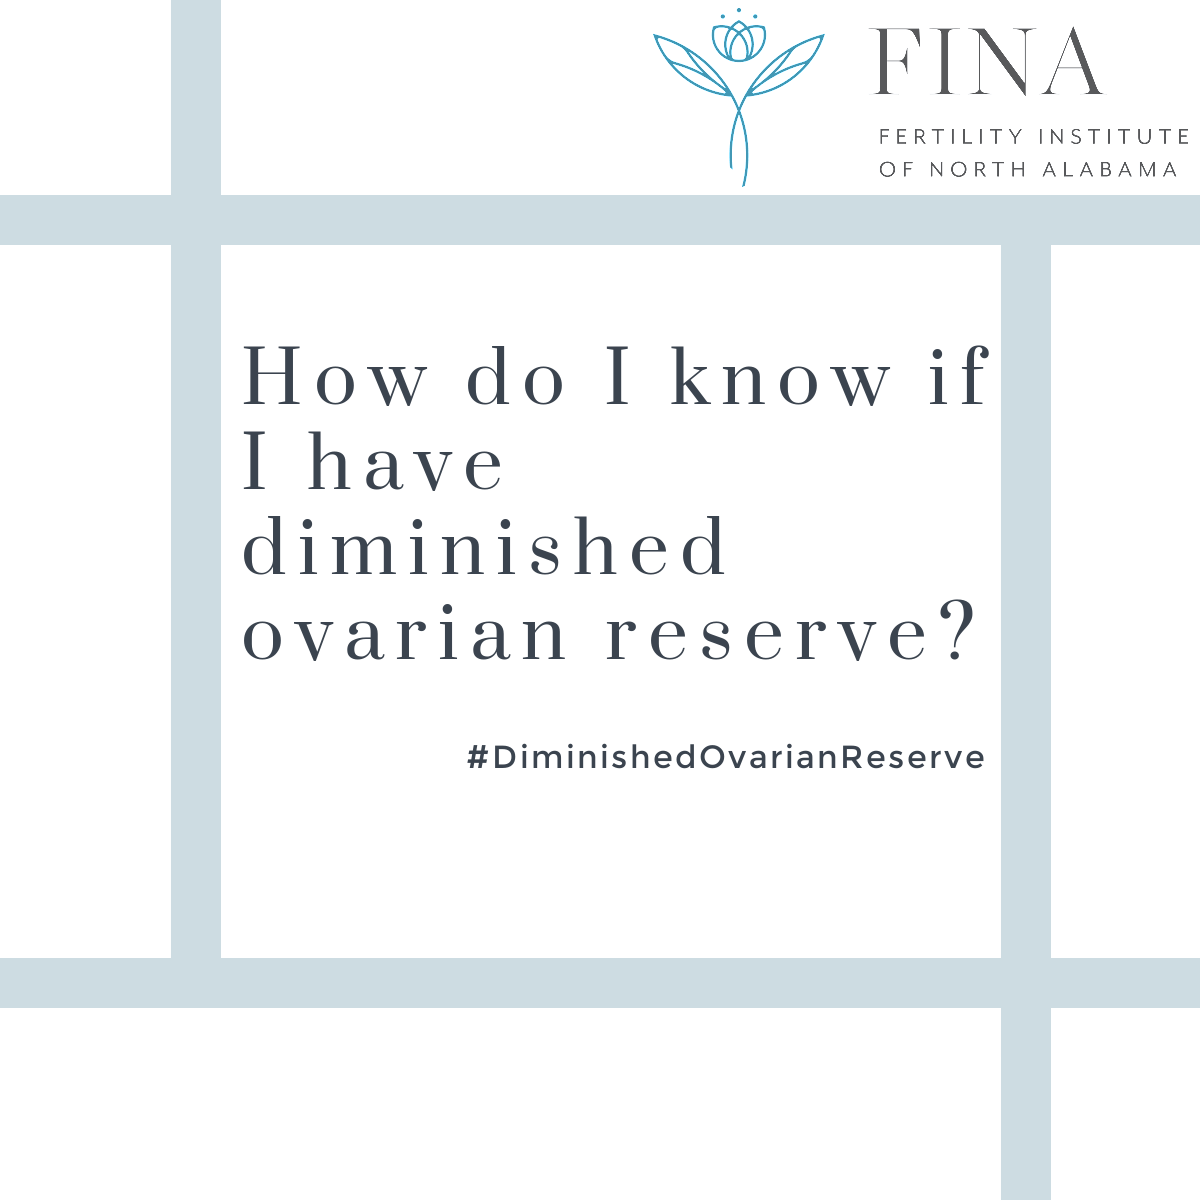 How do I know if I have Diminished Ovarian Reserve?